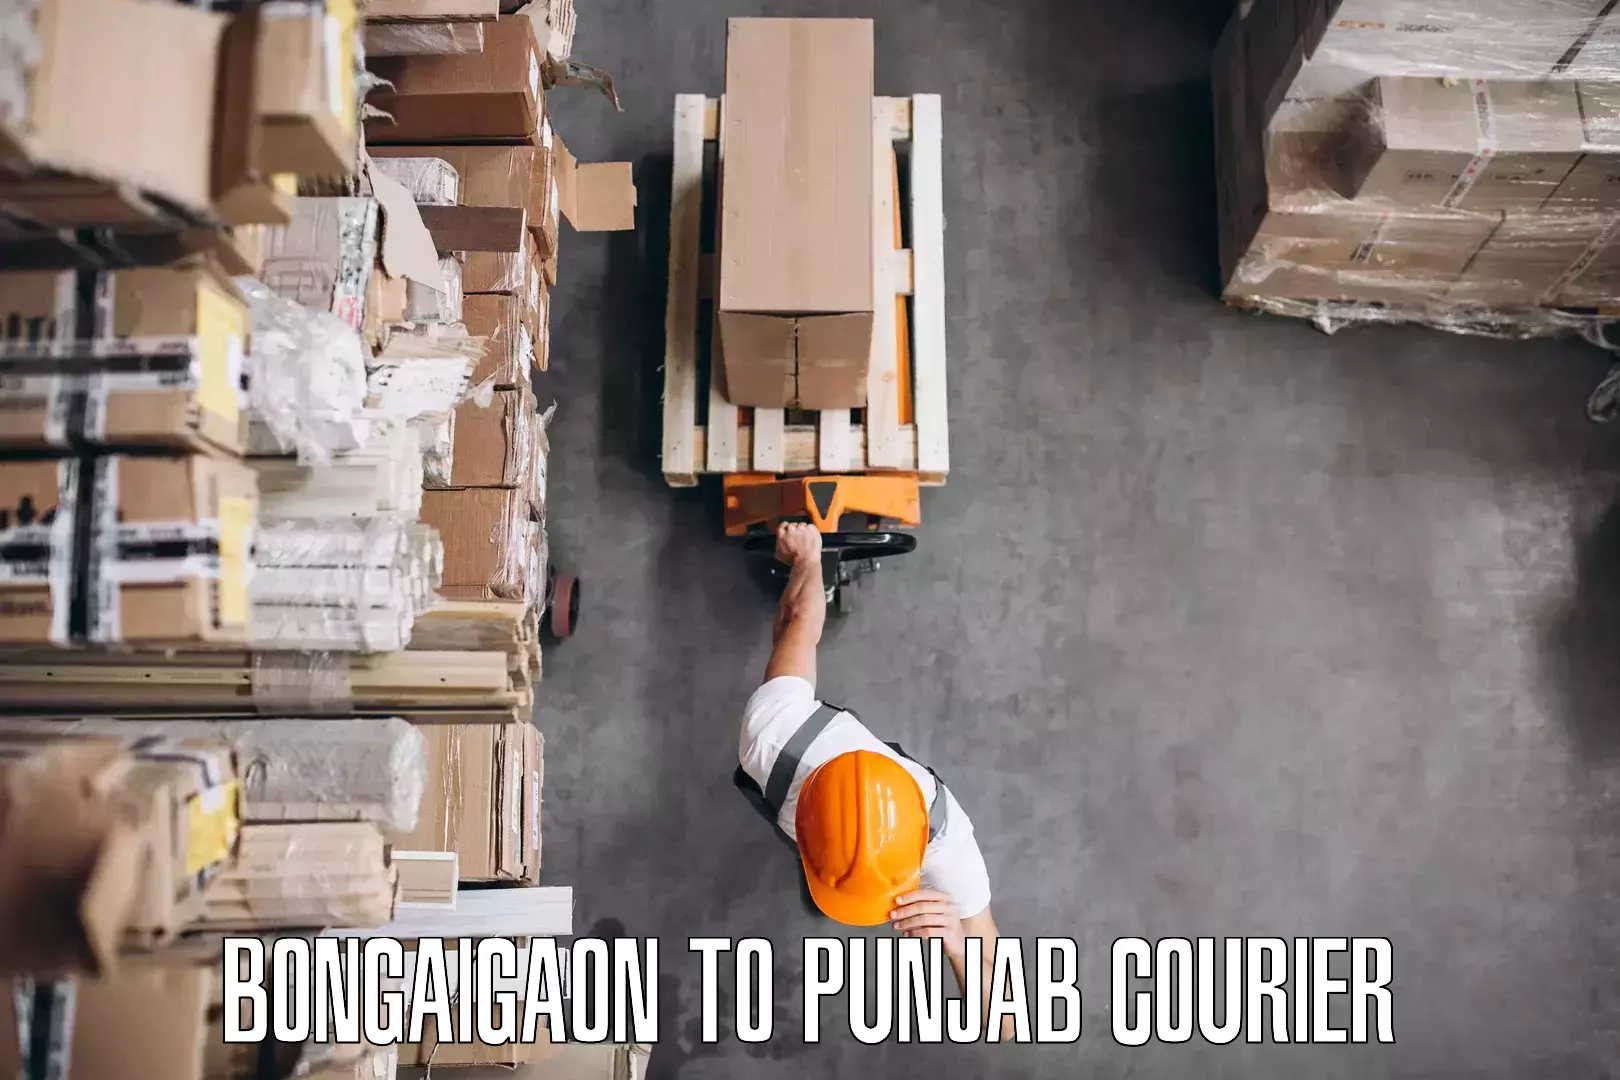 Cost-effective moving options Bongaigaon to Dhuri